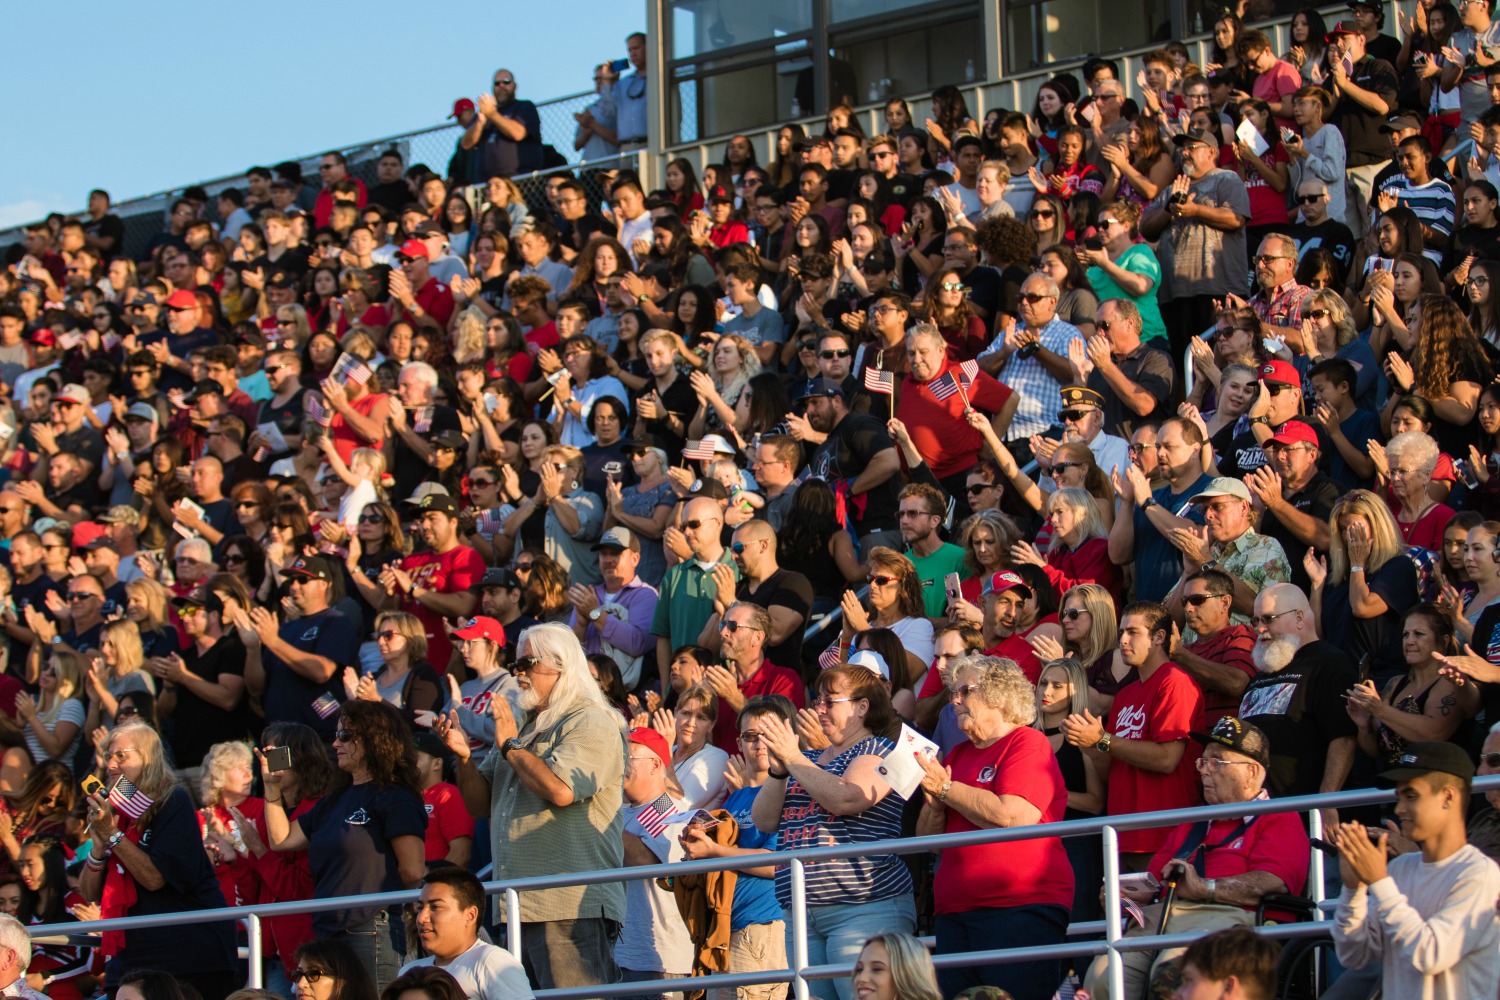 Community members cheer during the dedication ceremony for the Michael A. Monsoor Memorial Stadium